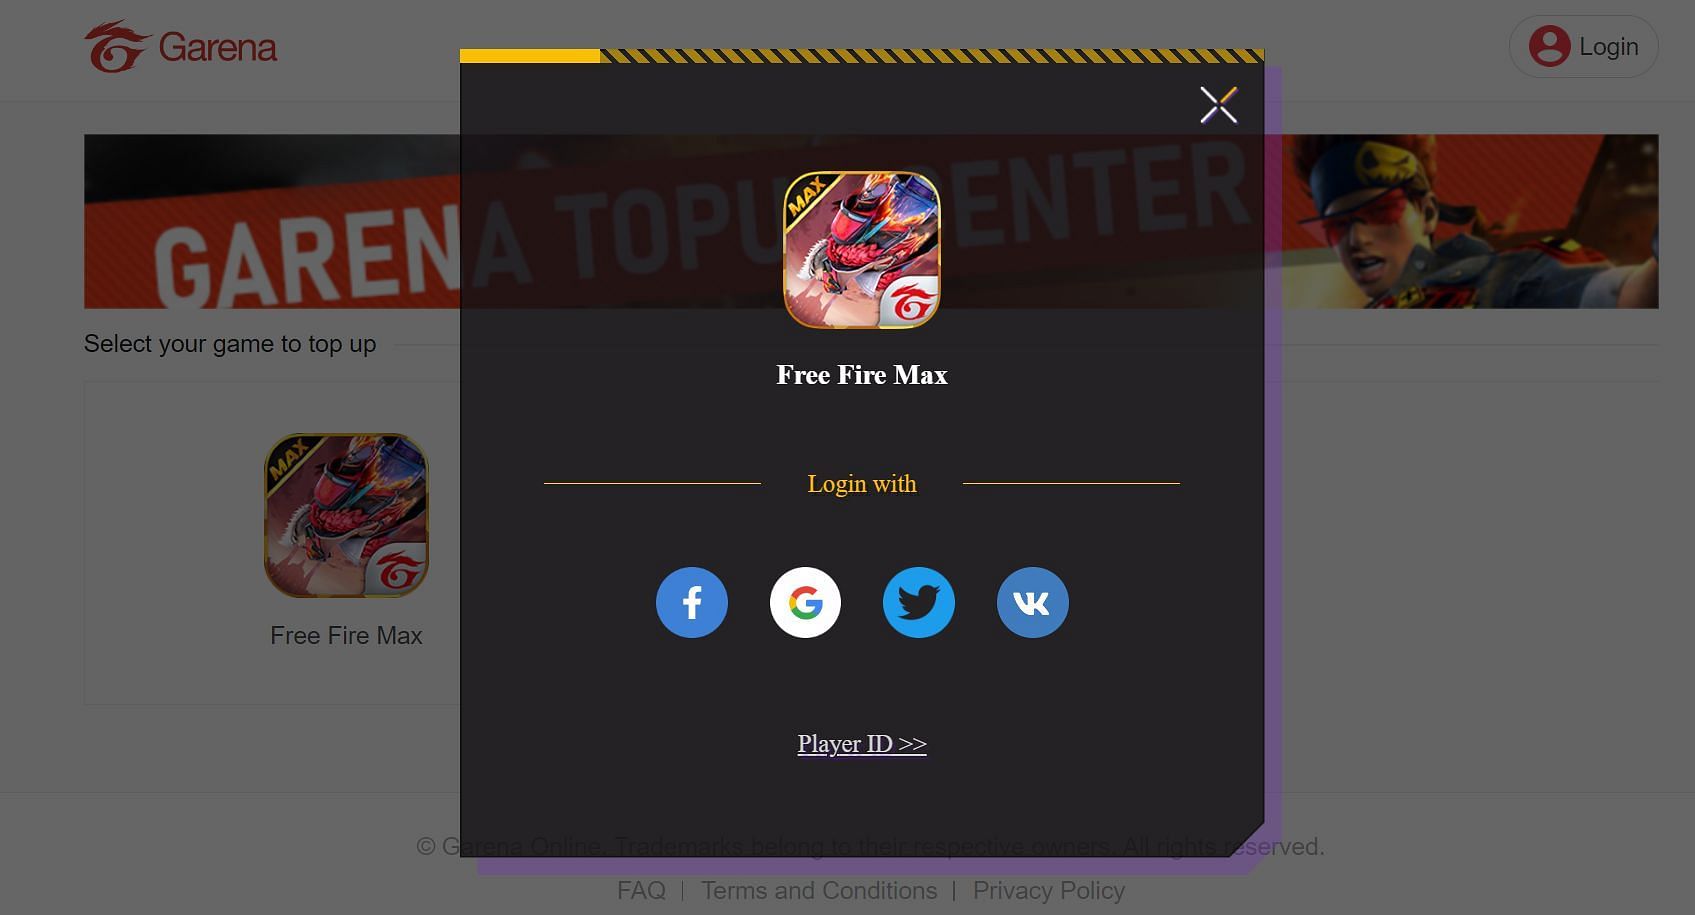 Login through one of the options available on the website (Image via Garena)